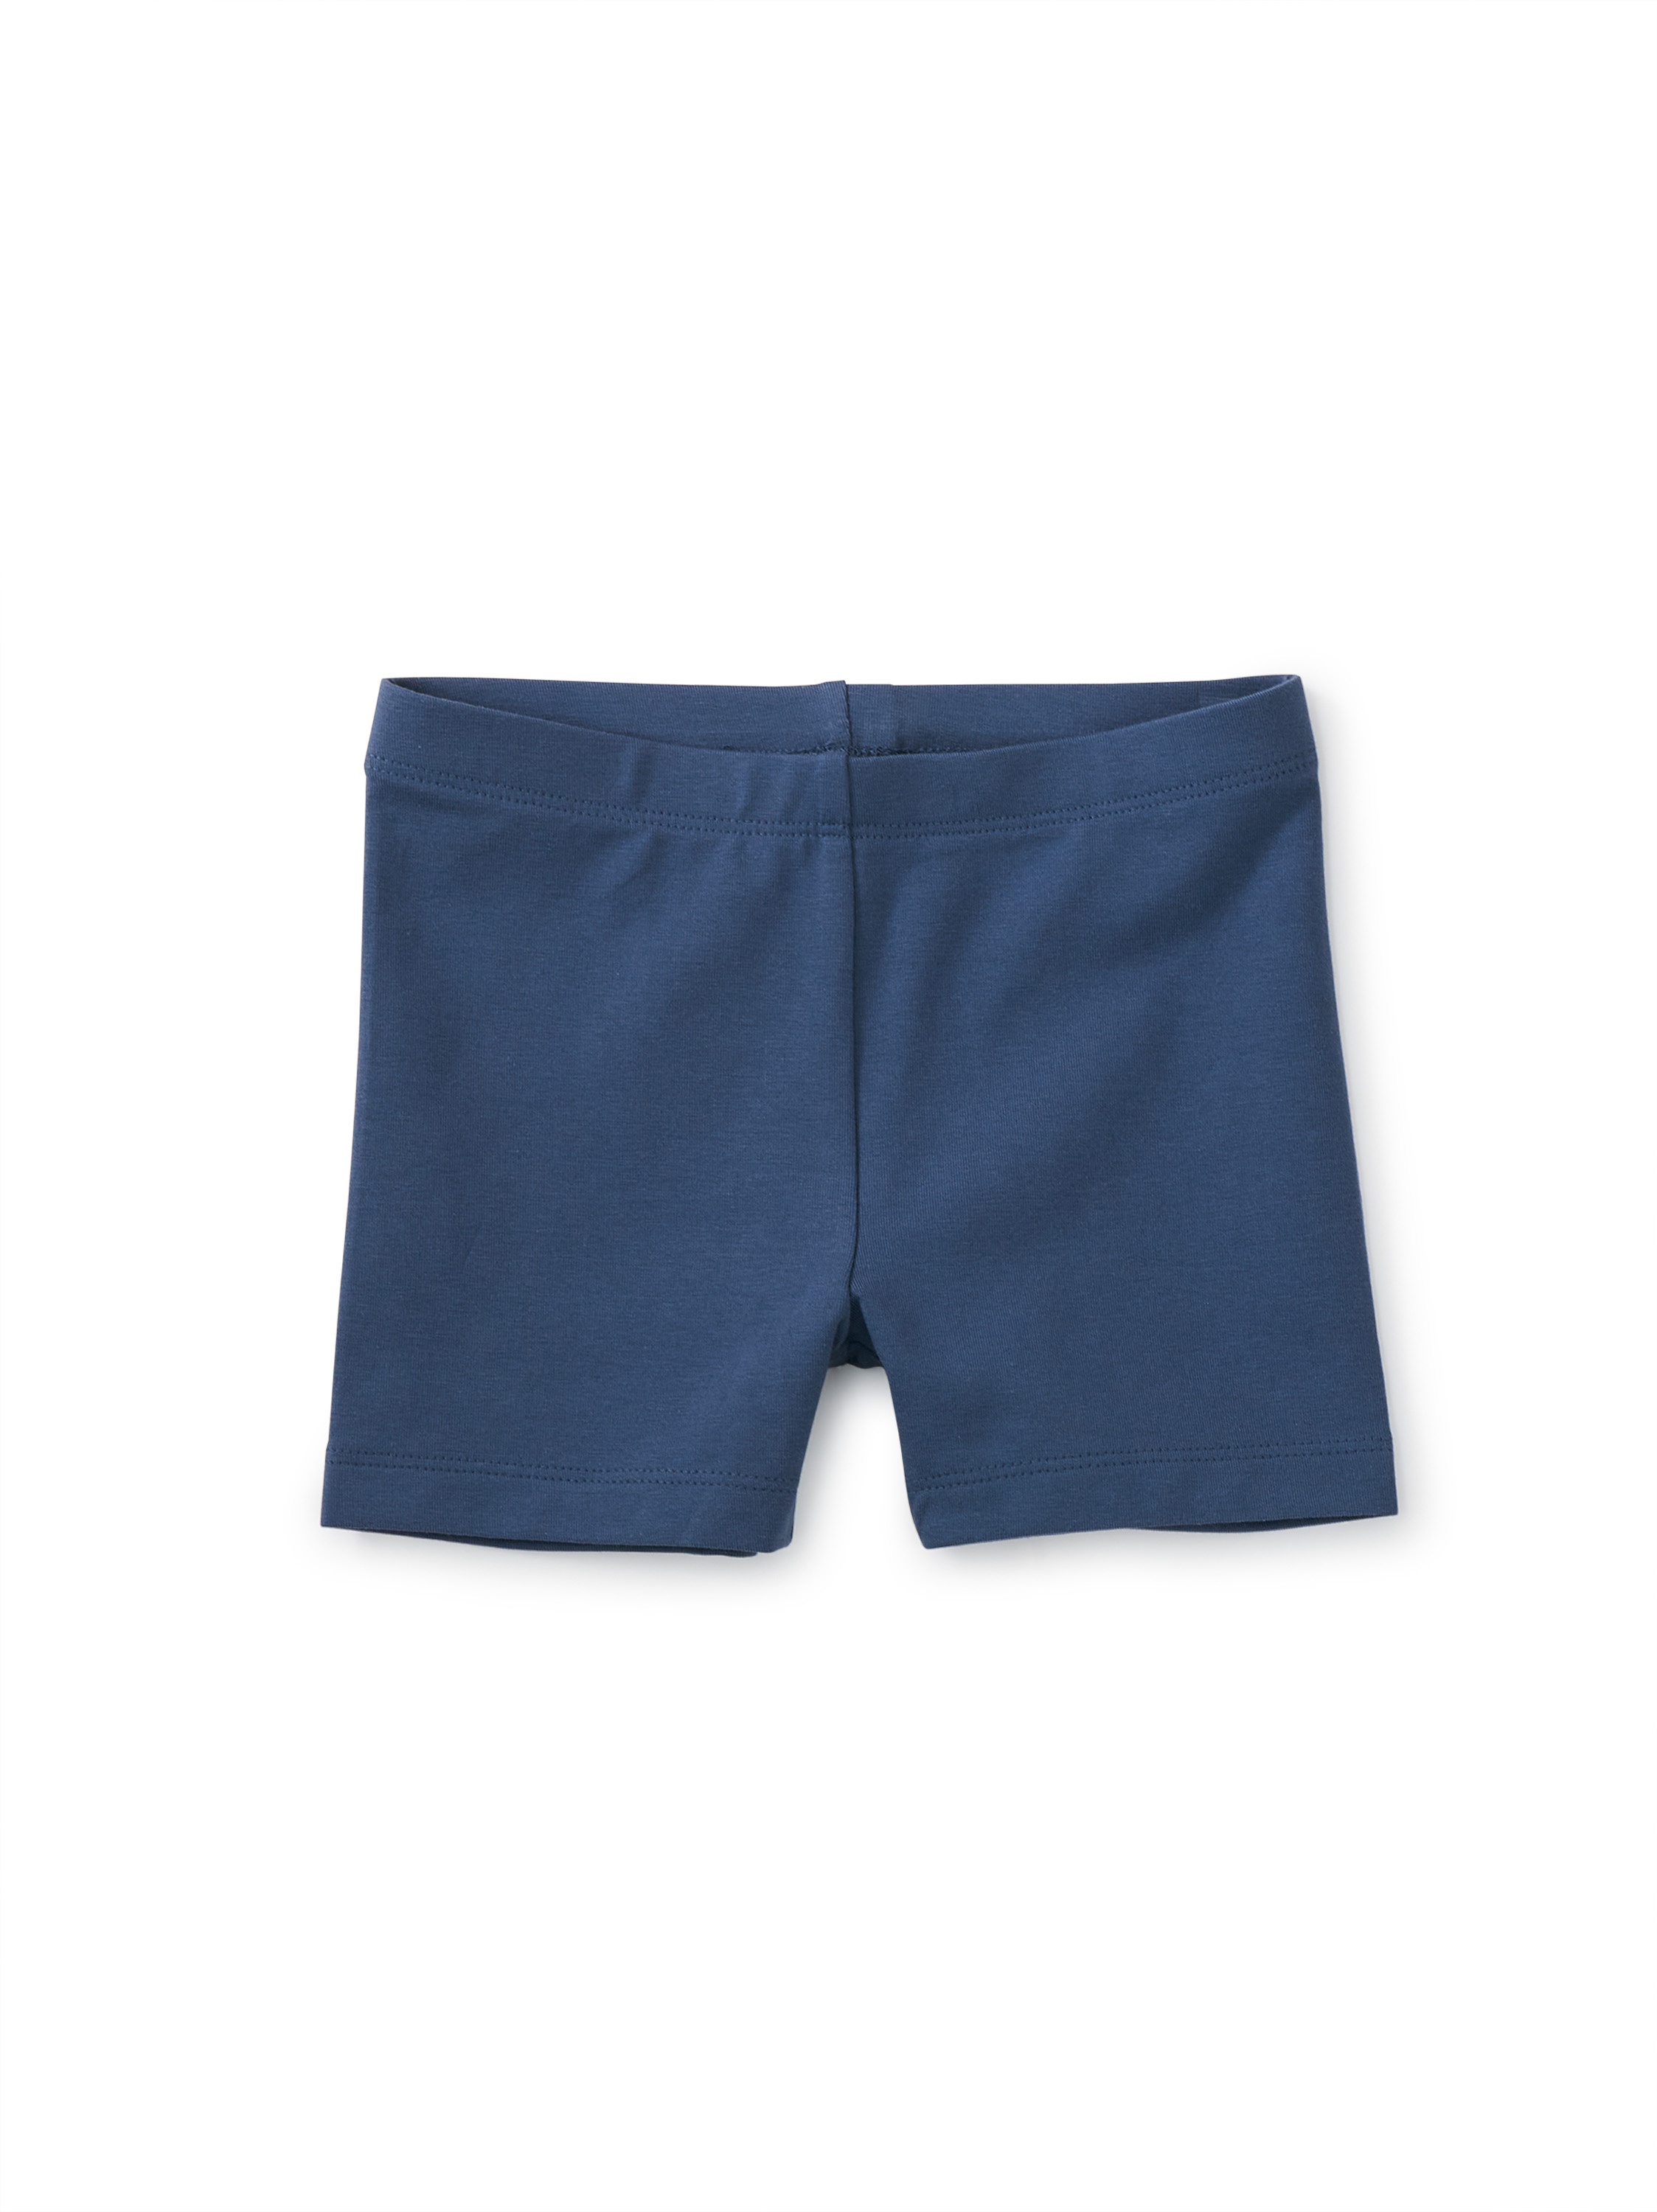 Somersault Shorts | Tea Collection